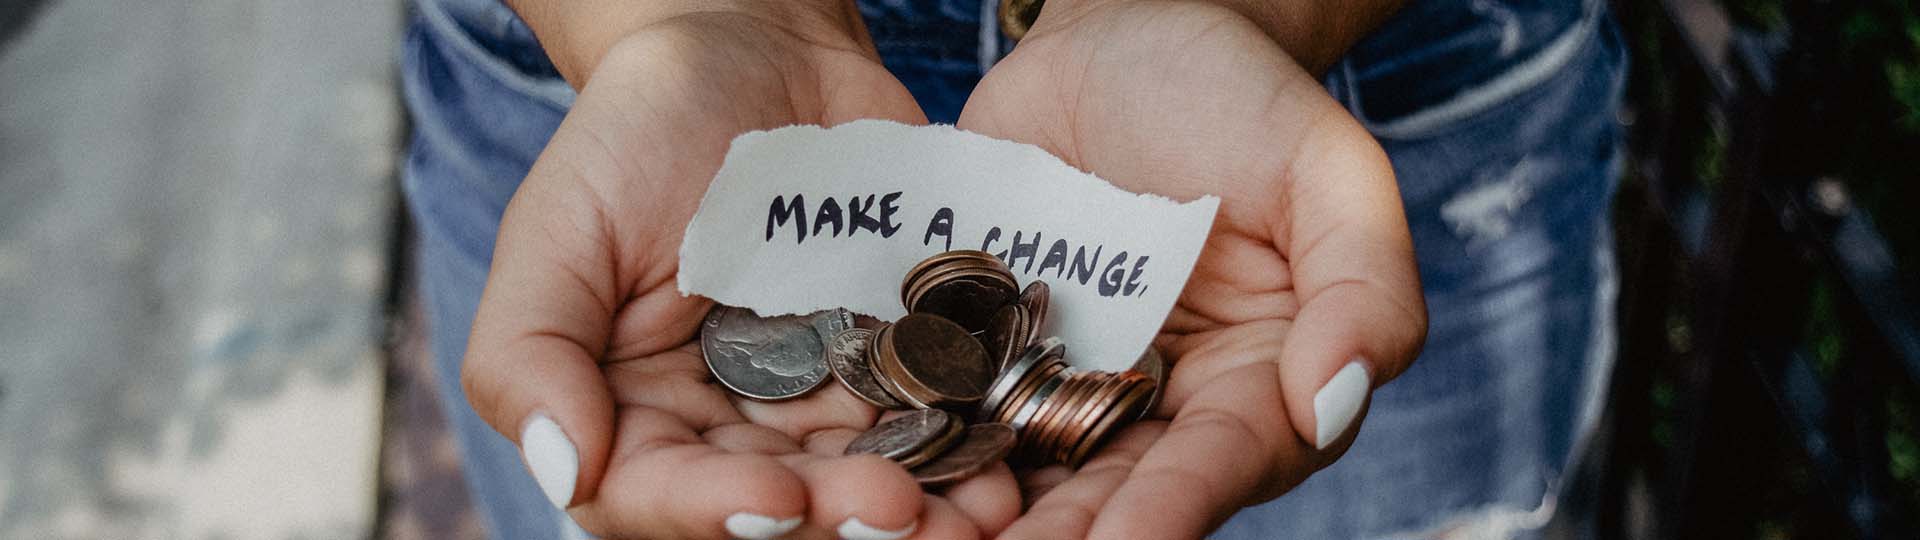 Hands holding out coins and a piece of paper reading, "MAKE A CHANGE."